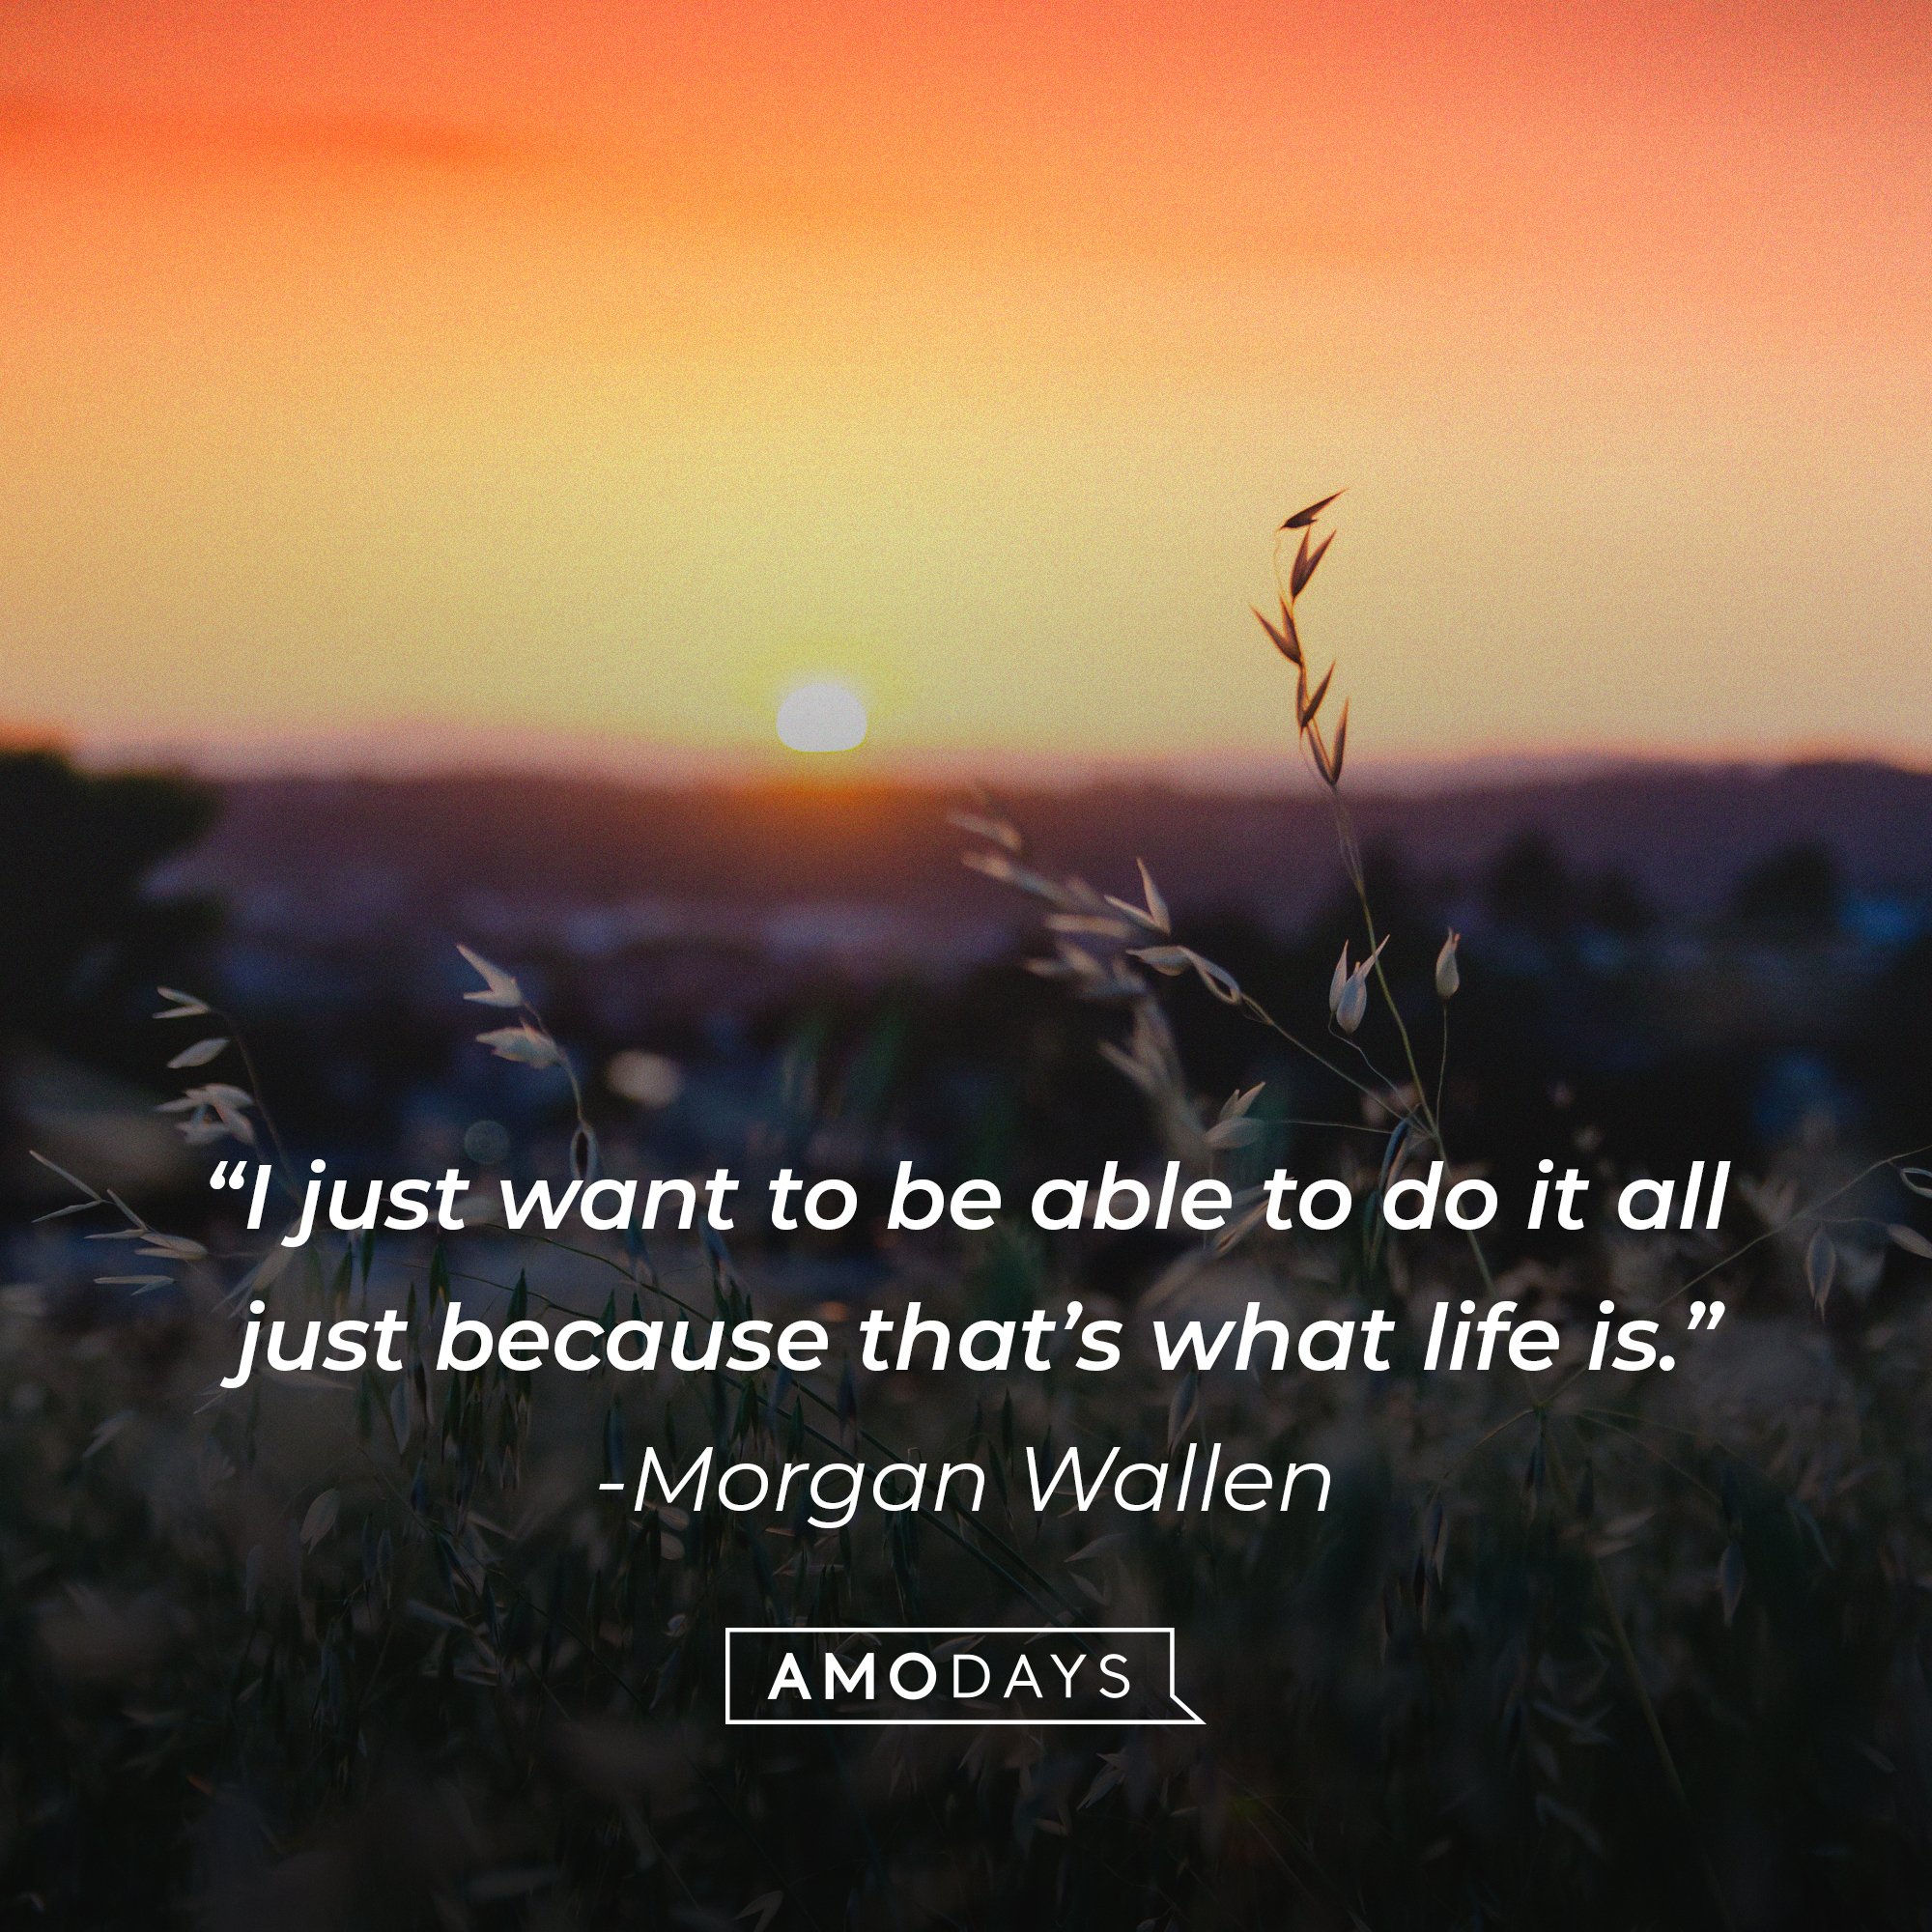  Morgan Wallen’s quote: “I just want to be able to do it all just because that’s what life is.” |  Image: AmoDays